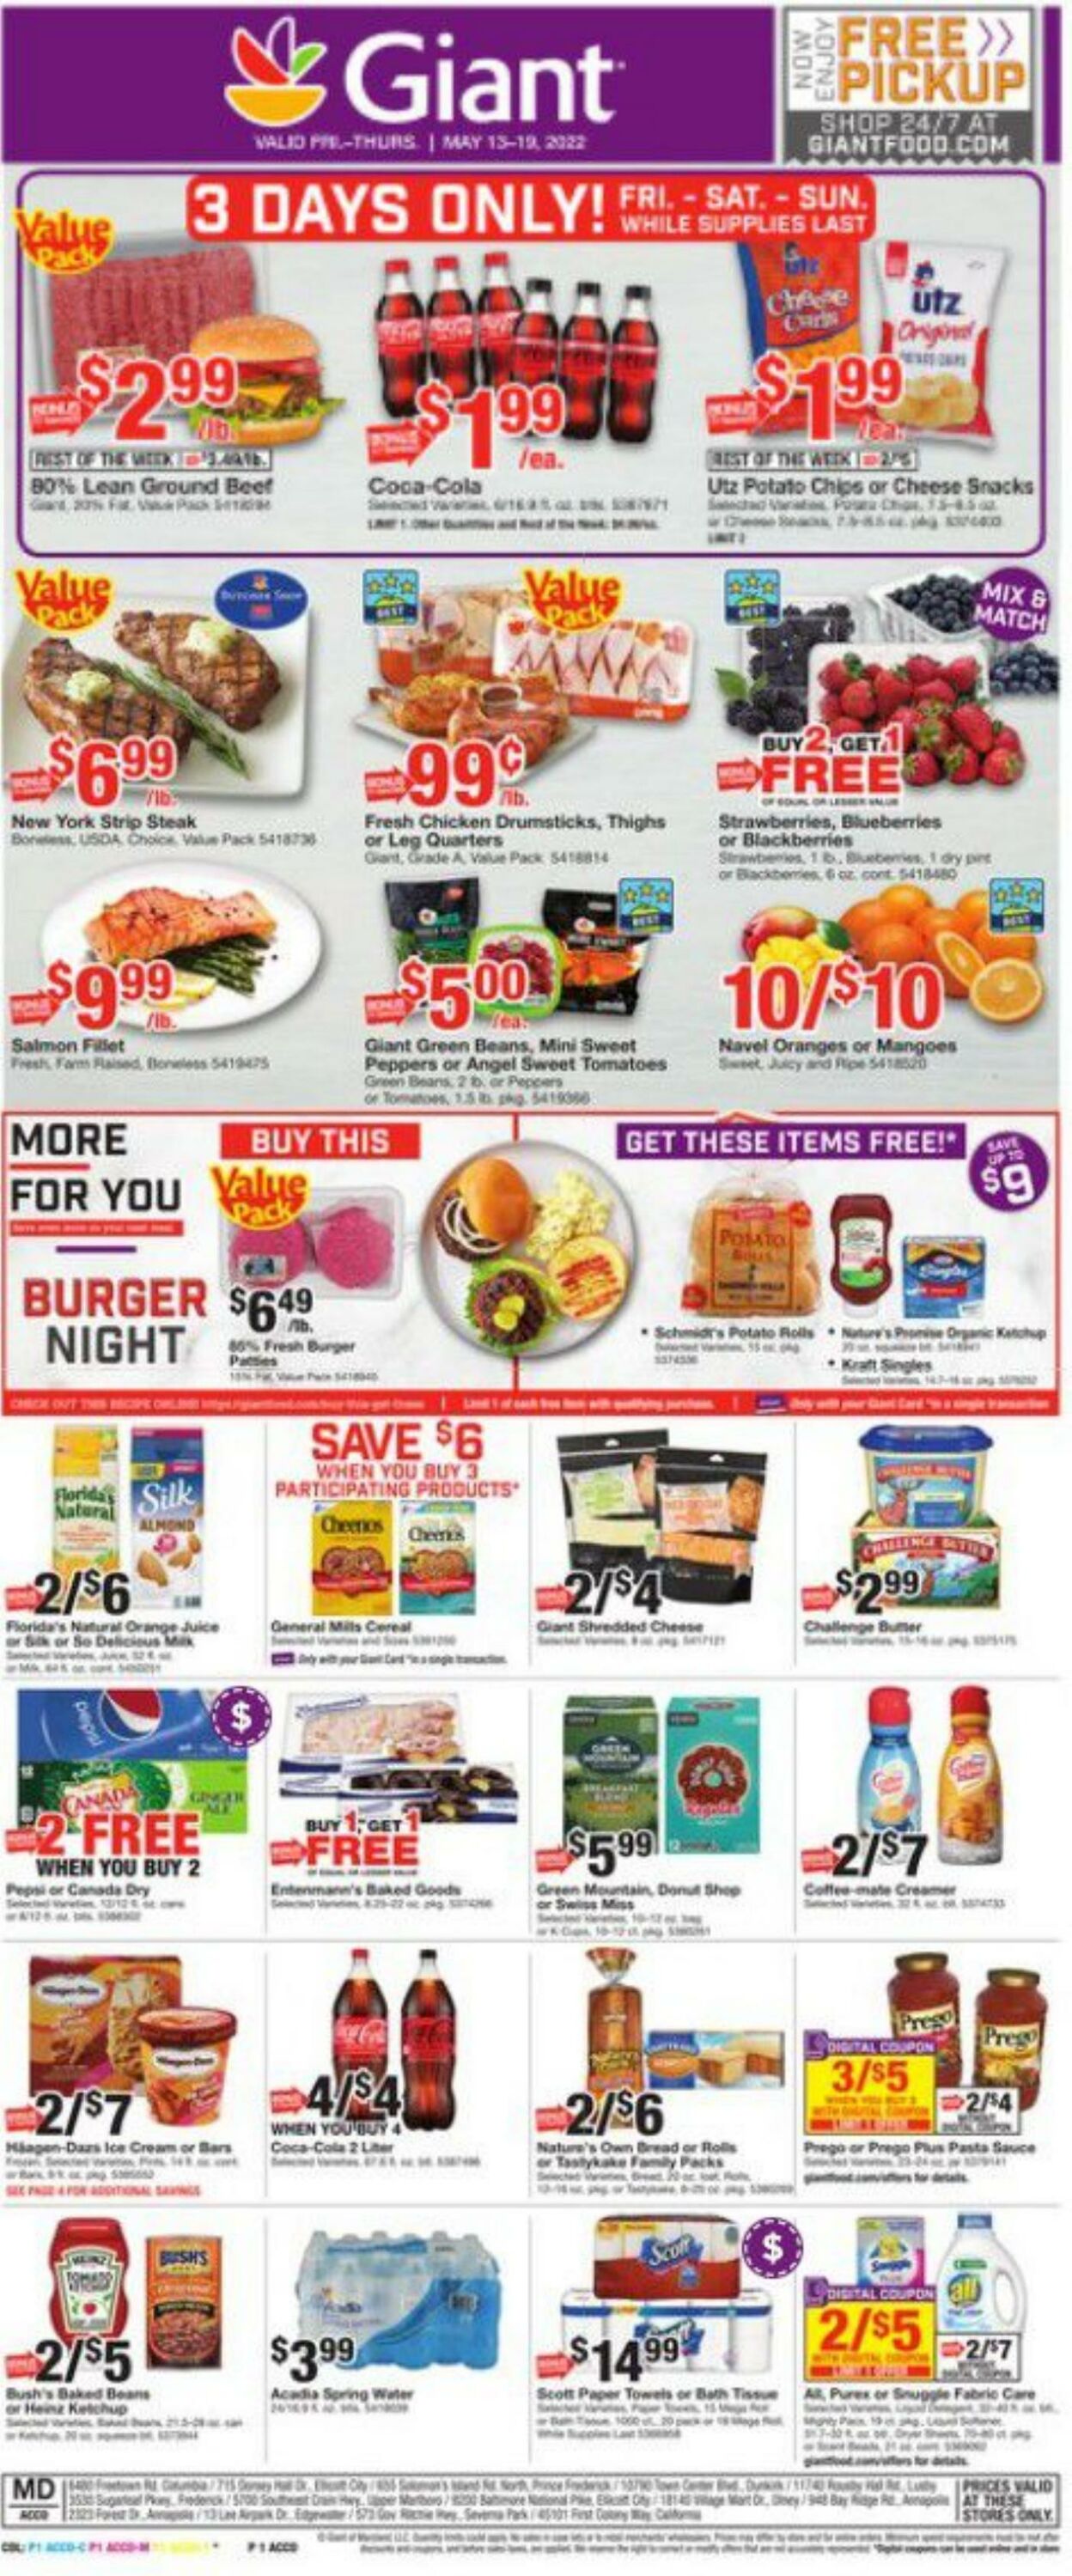 Giant Food Promotional weekly ads